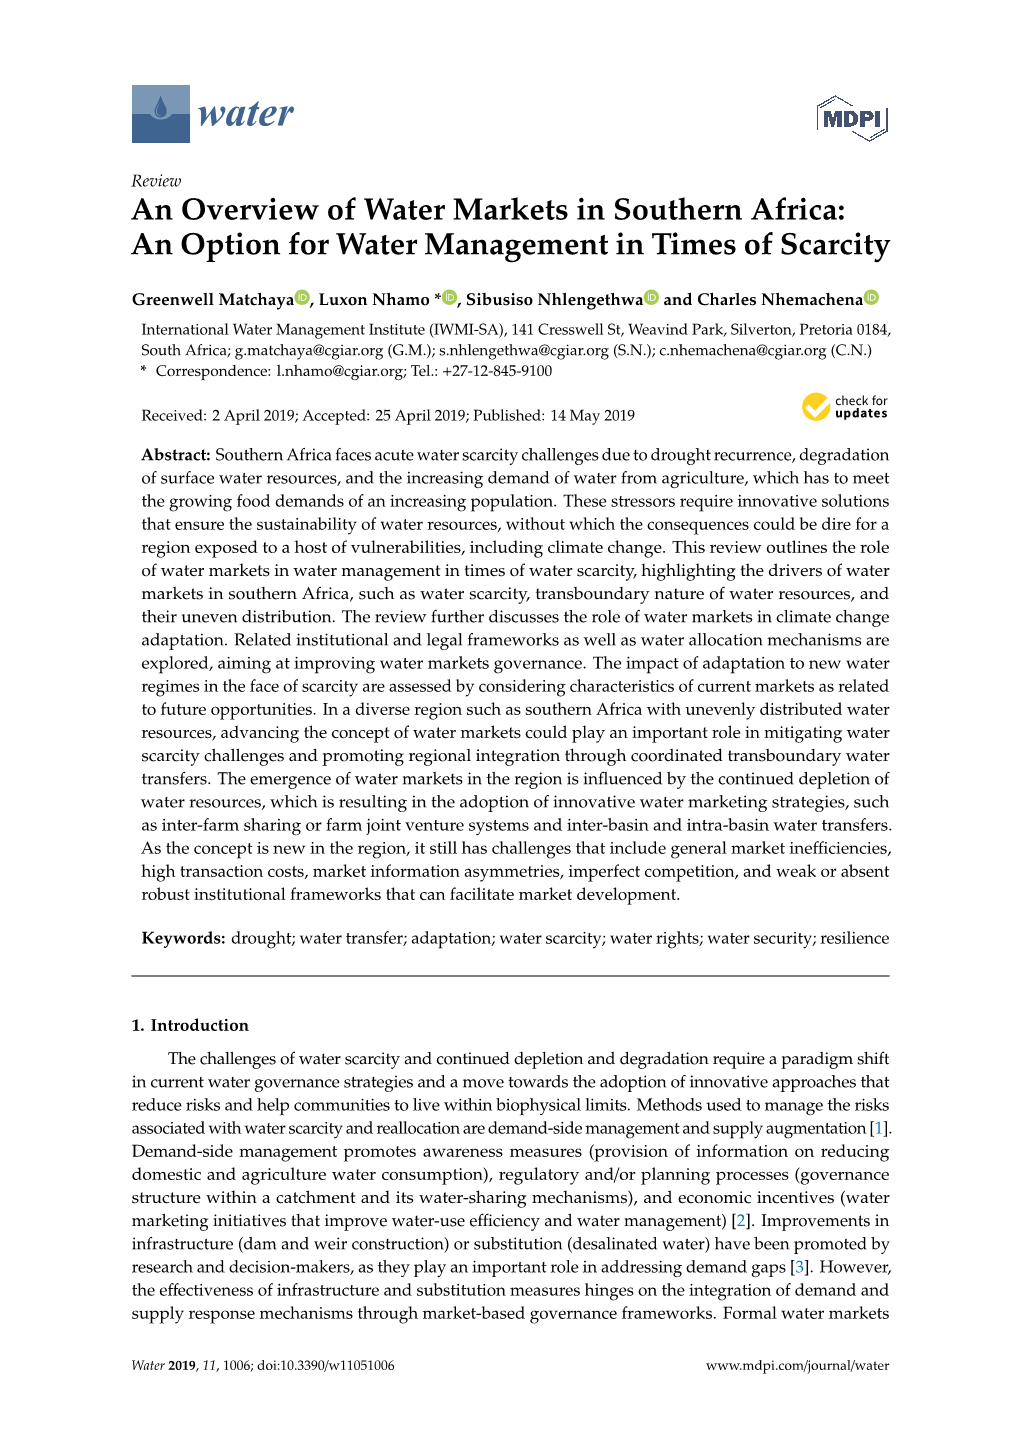 An Overview of Water Markets in Southern Africa: an Option for Water Management in Times of Scarcity